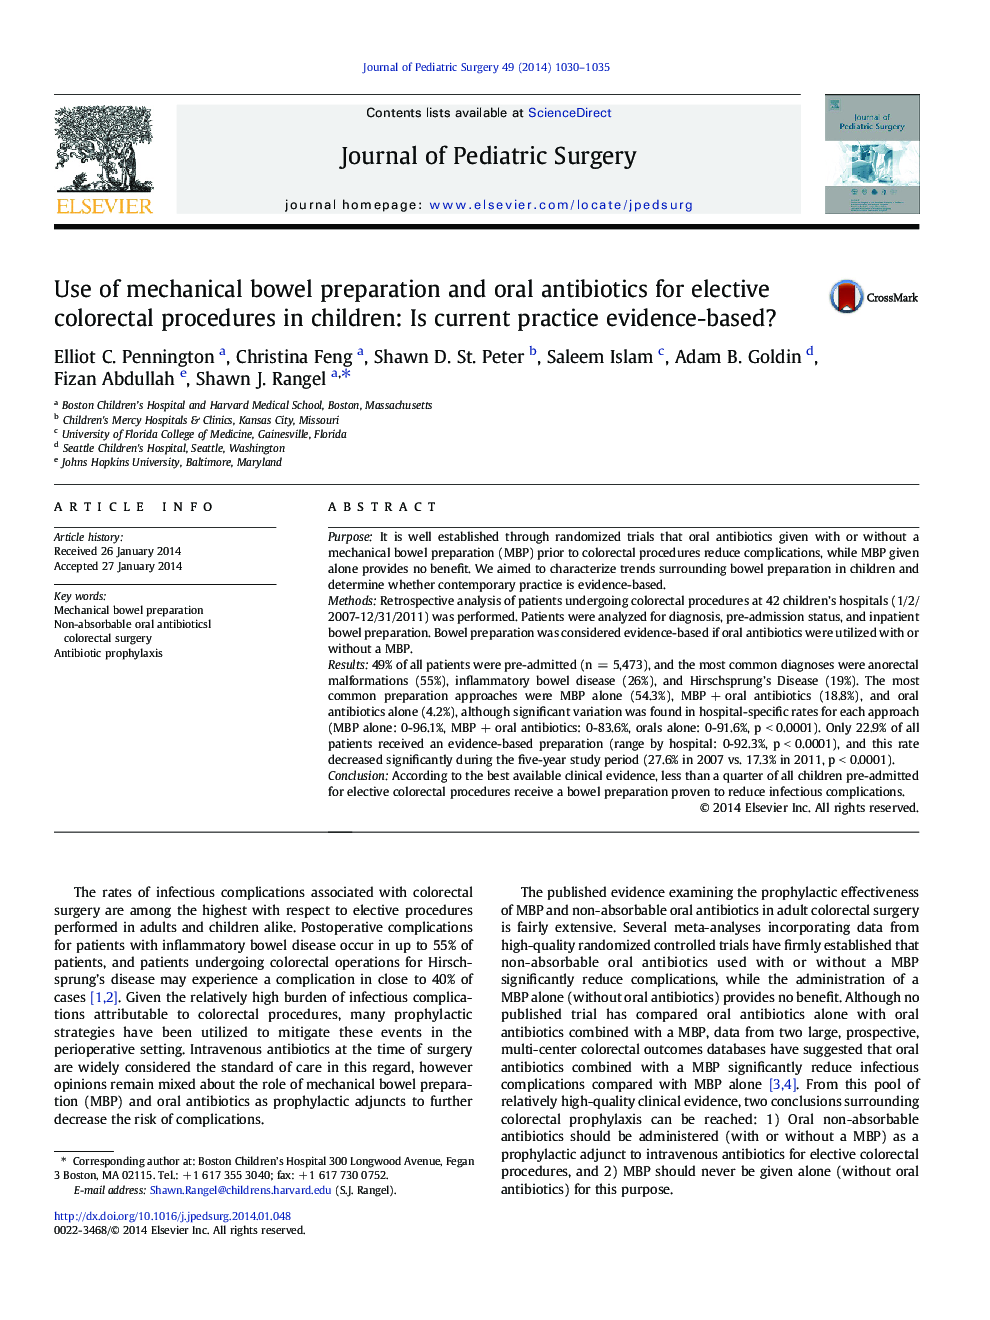 Use of mechanical bowel preparation and oral antibiotics for elective colorectal procedures in children: Is current practice evidence-based?